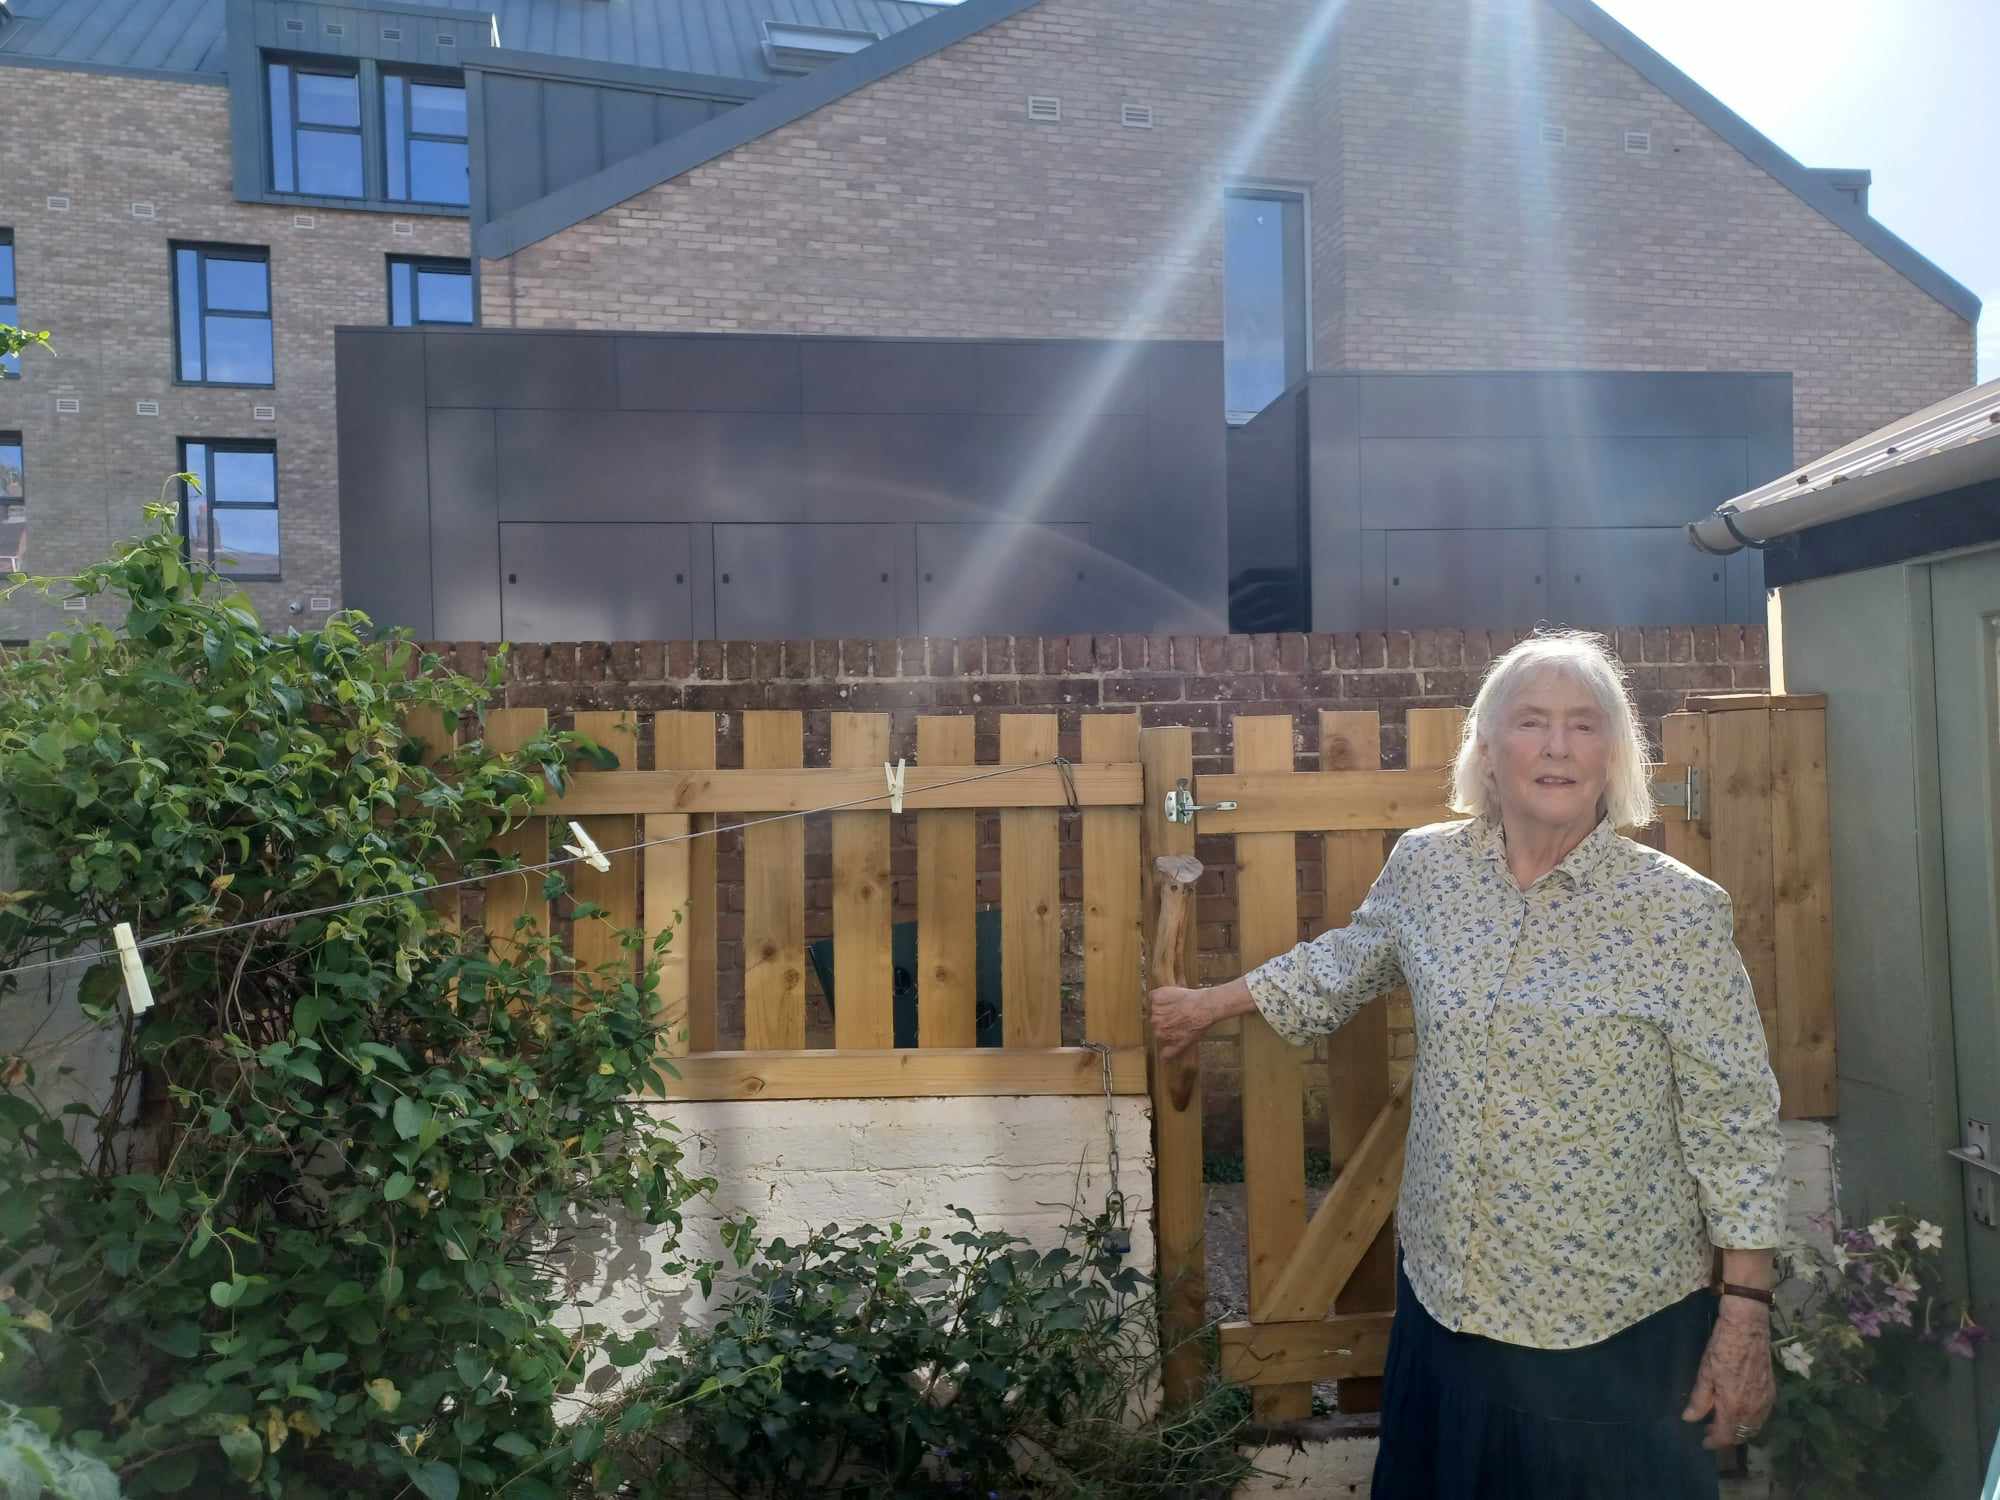 I’m devastated after enormous ugly heat pumps for newbuilds were built outside my garden – they could cost me thousands